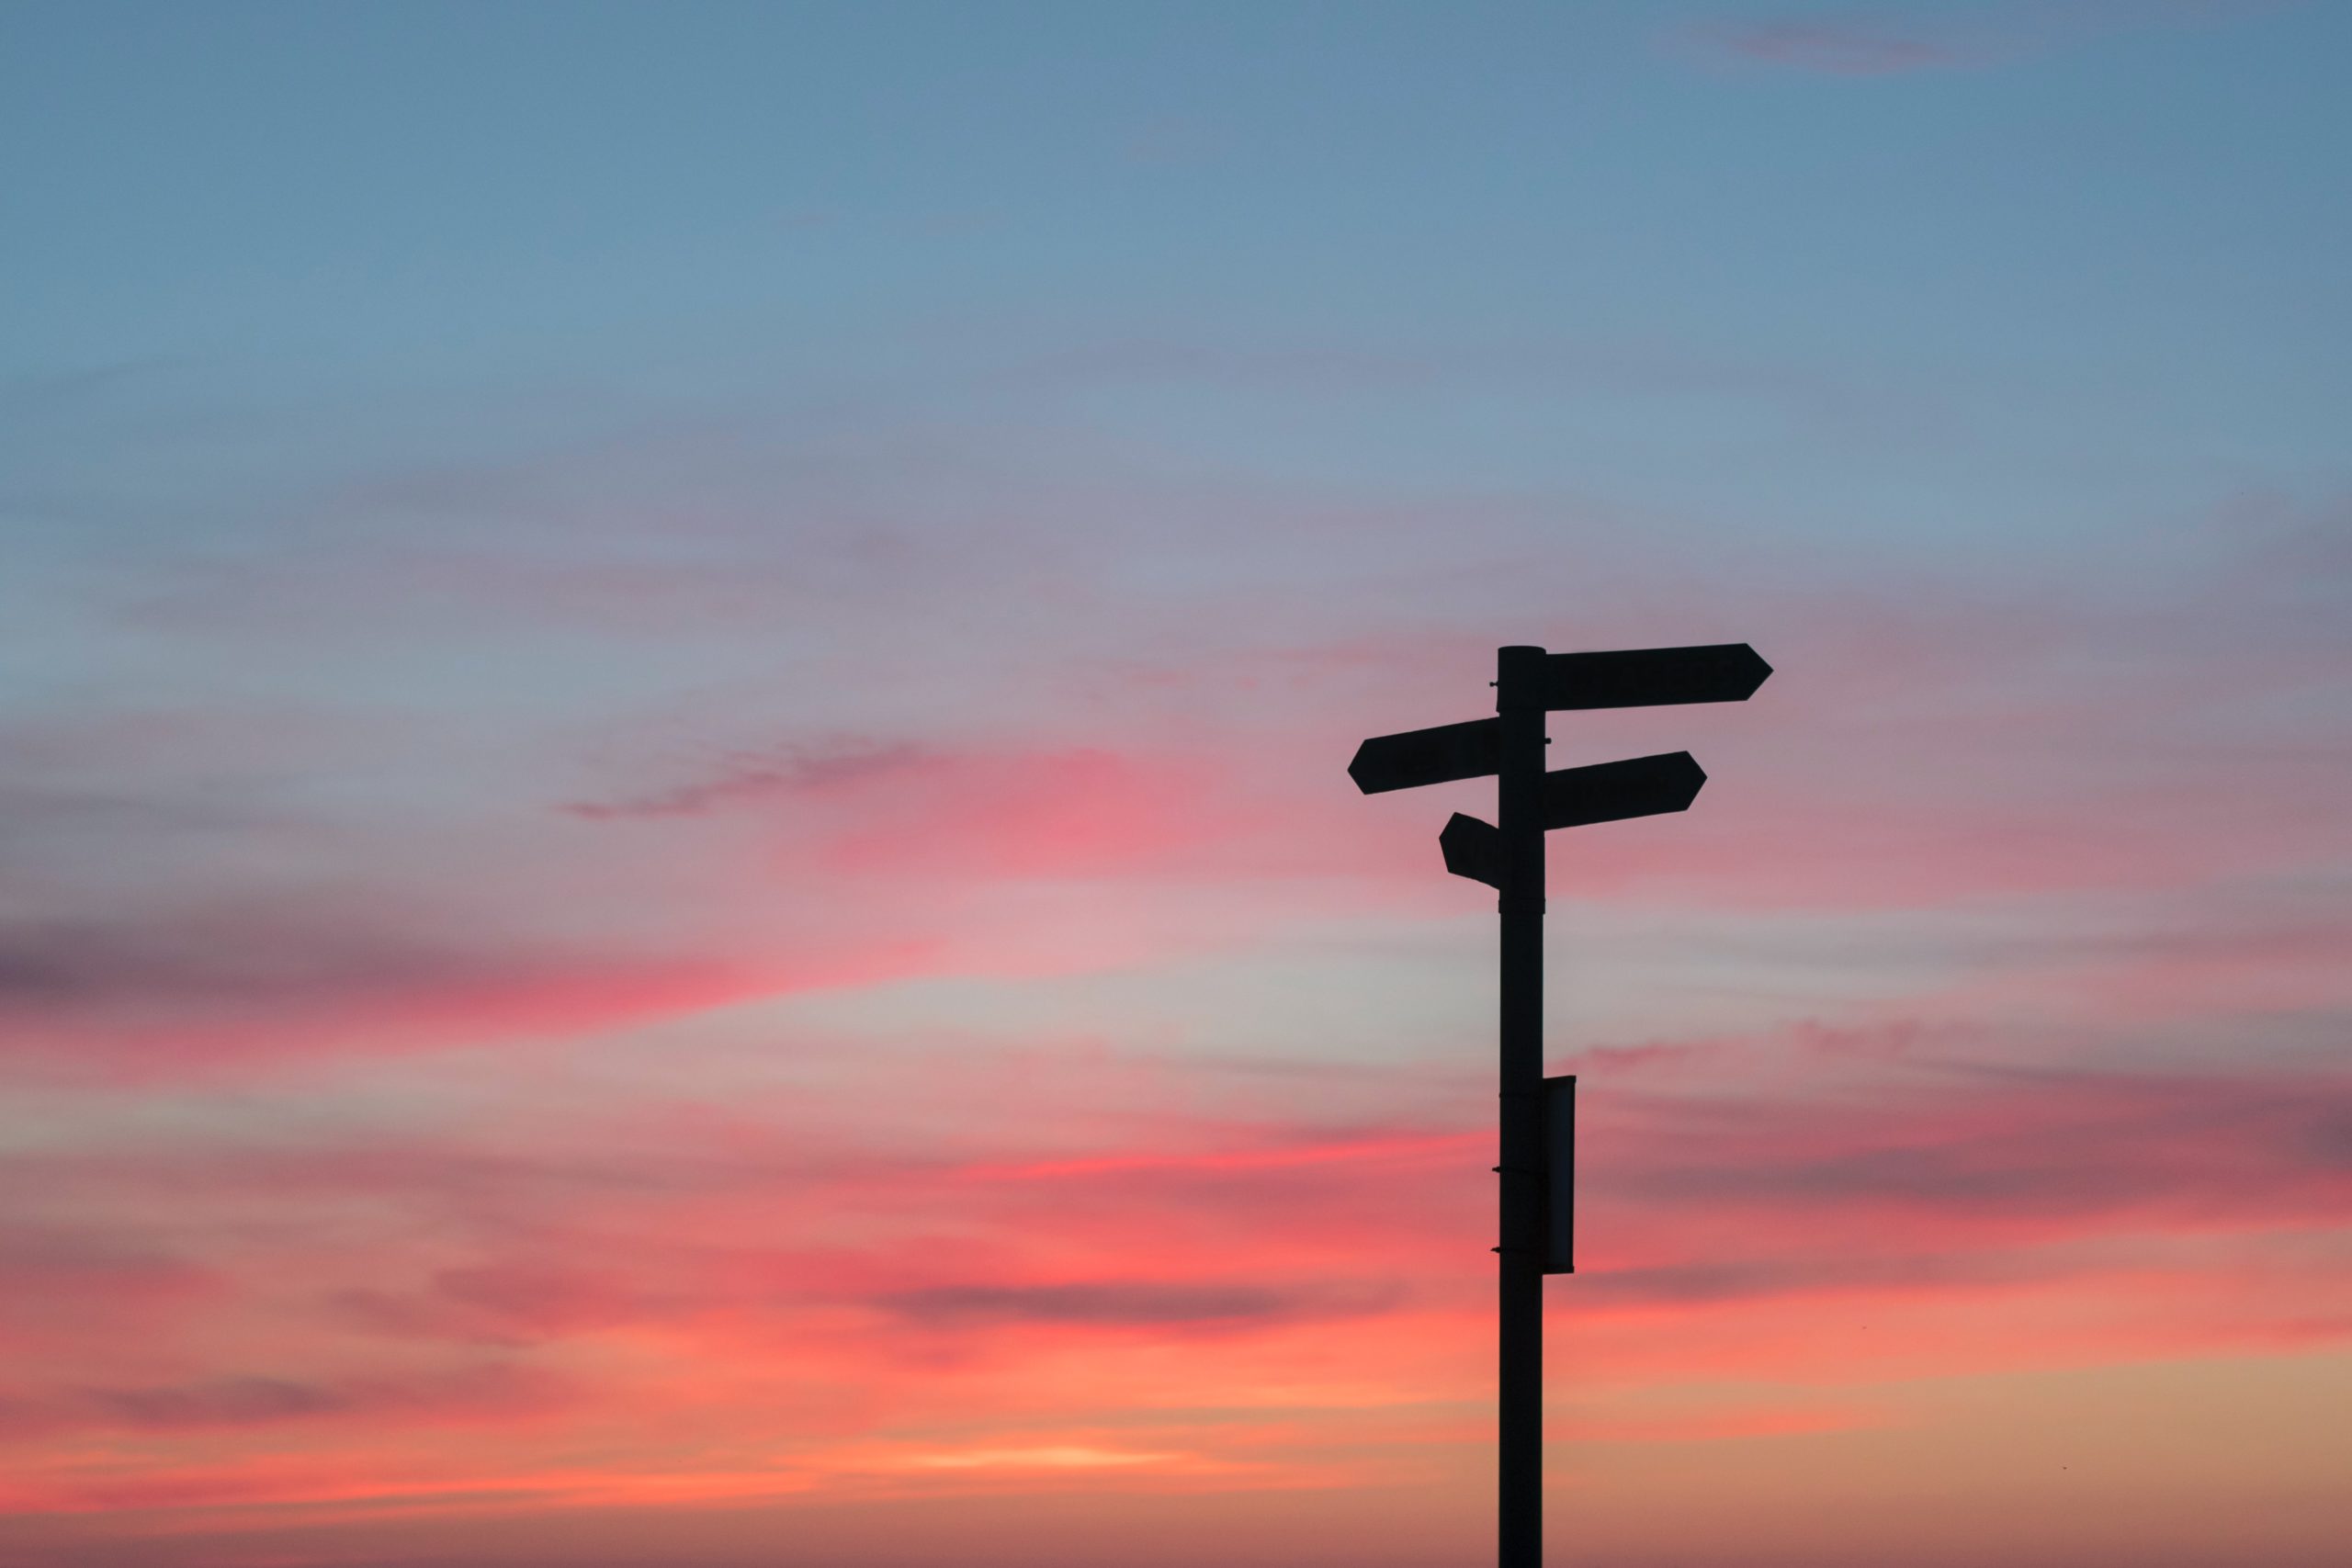 A silhouette of a signpost, with a brightly coloured sky at sunset behind it.